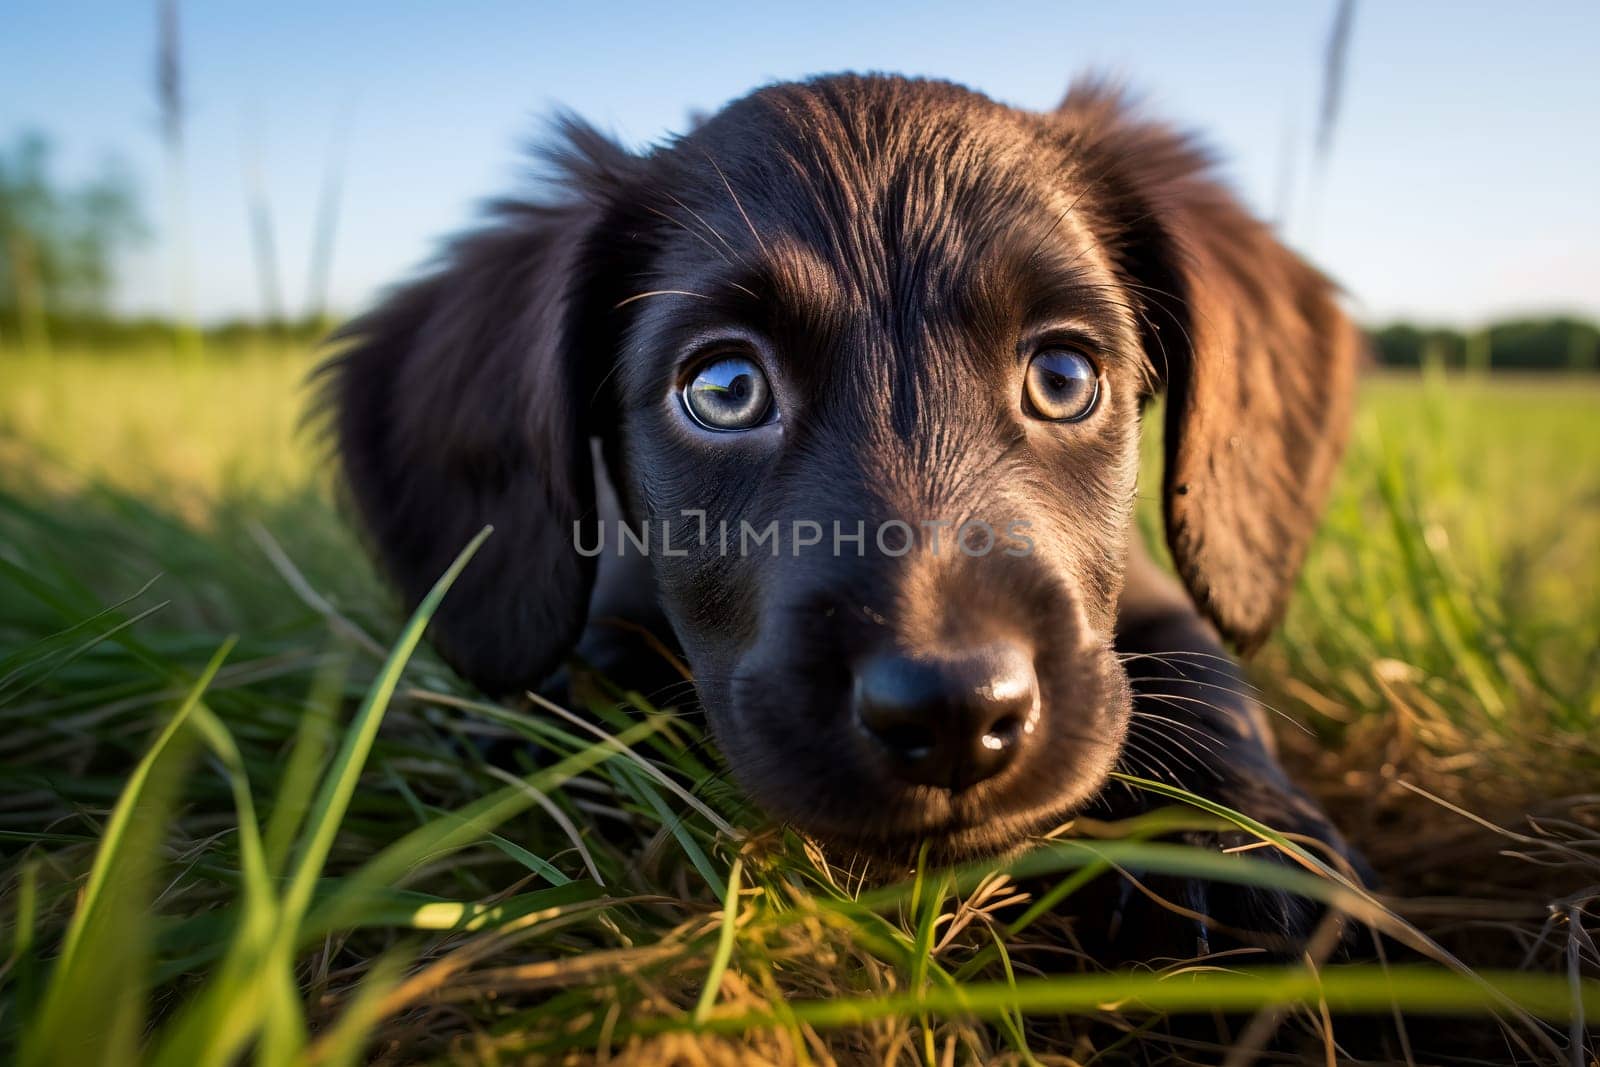 Adorable dachshund Puppy Relaxing in Green Grass During Sunset by dimol